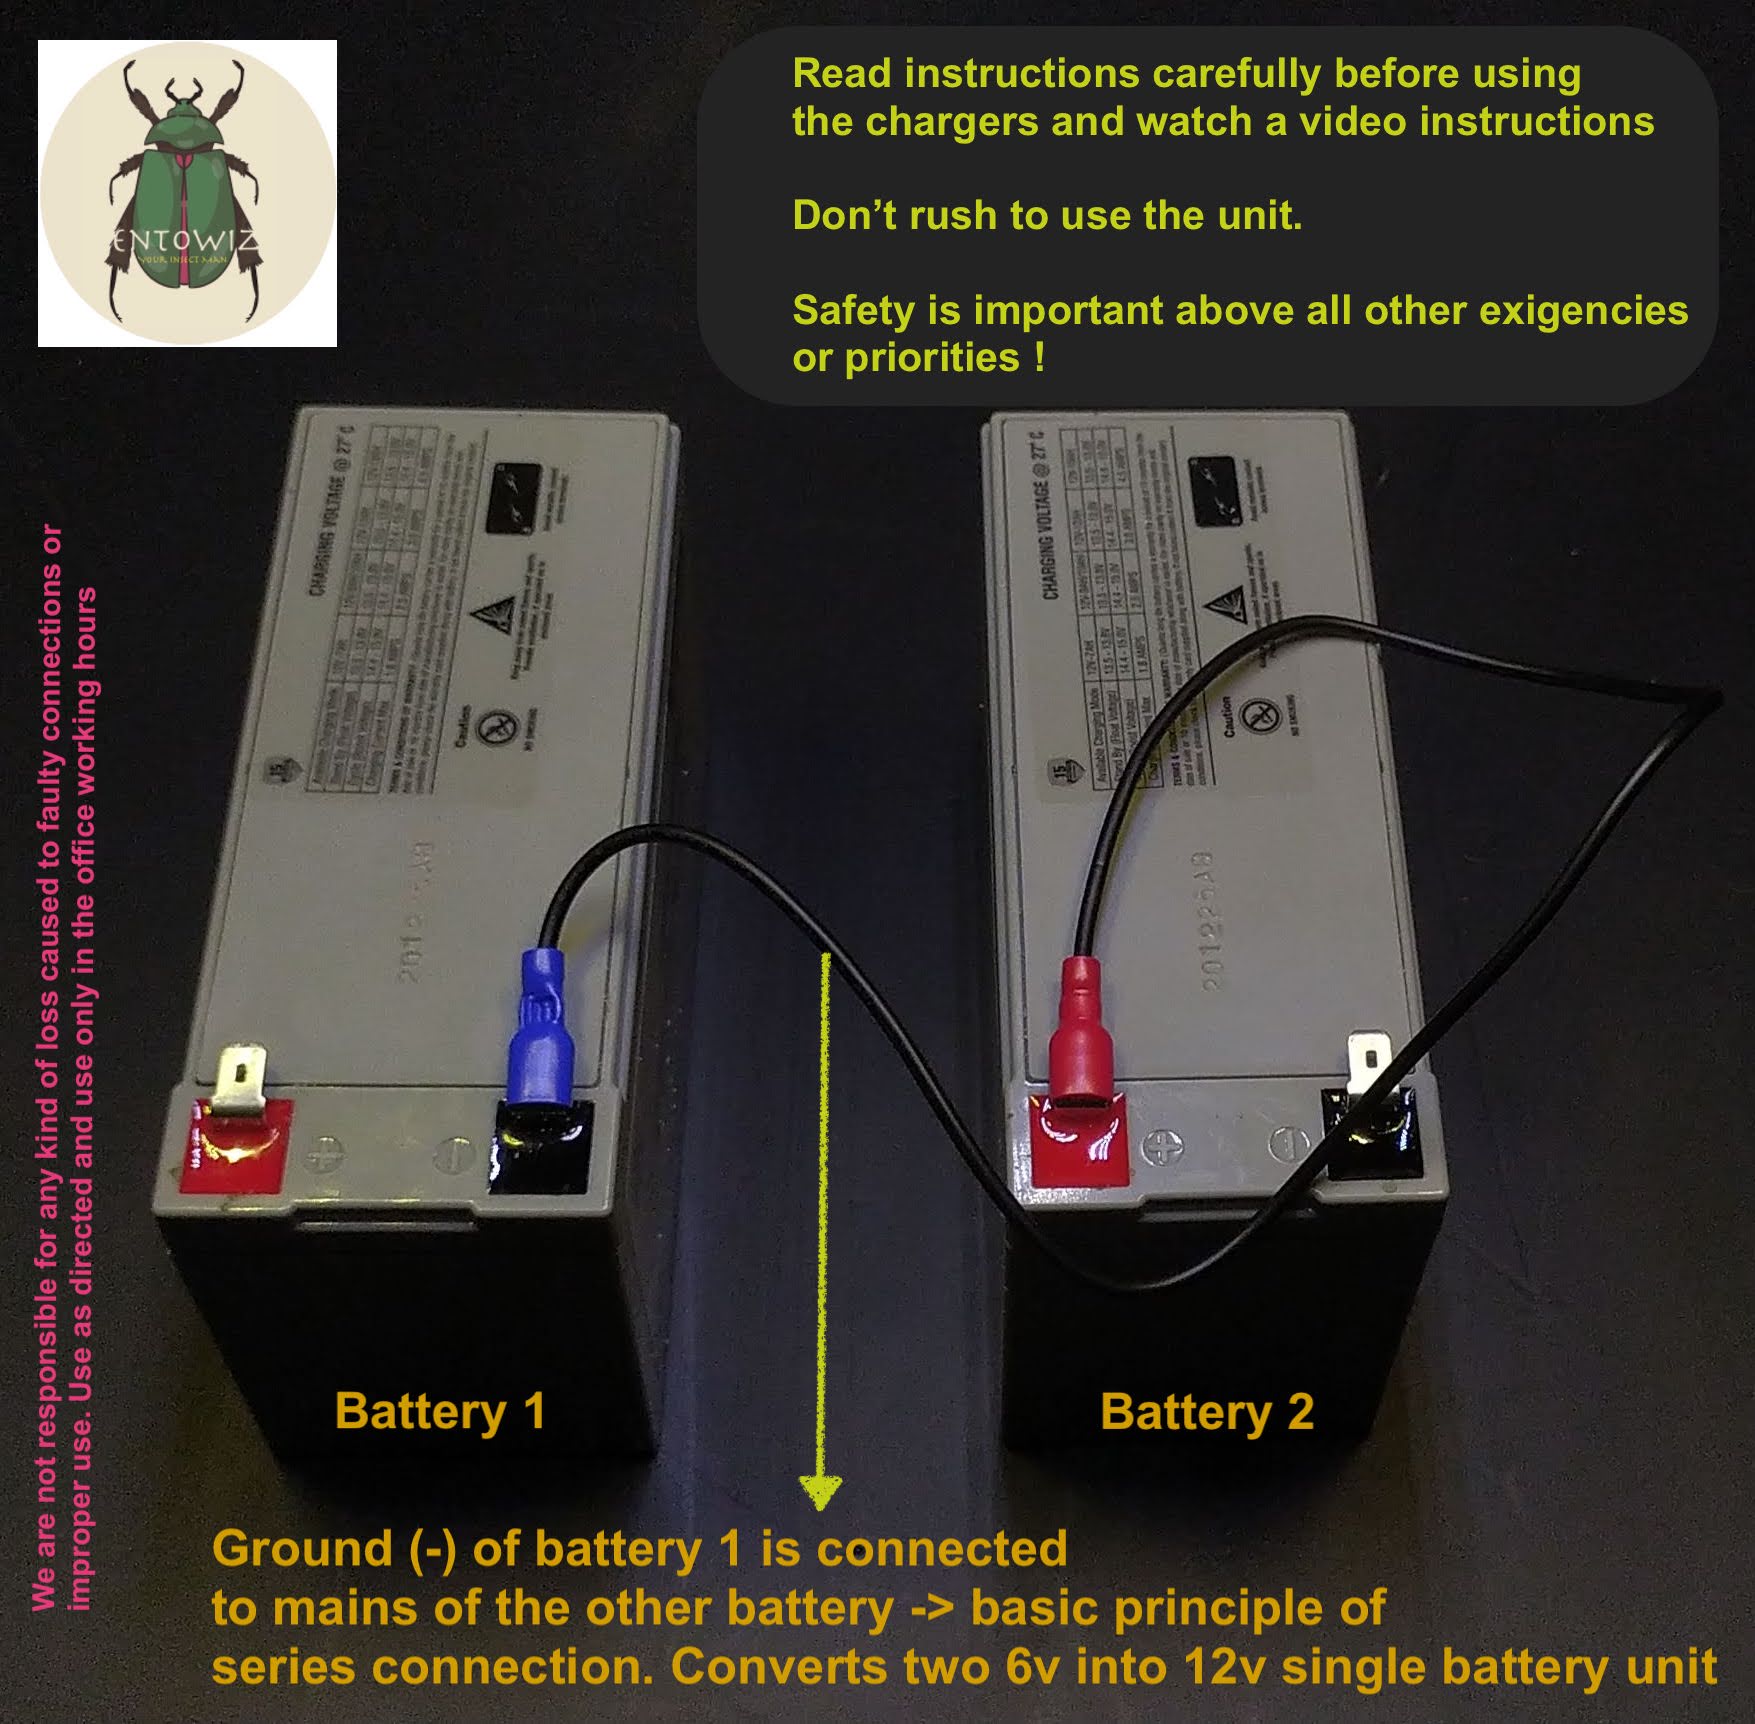 Battery Charger 3 output points